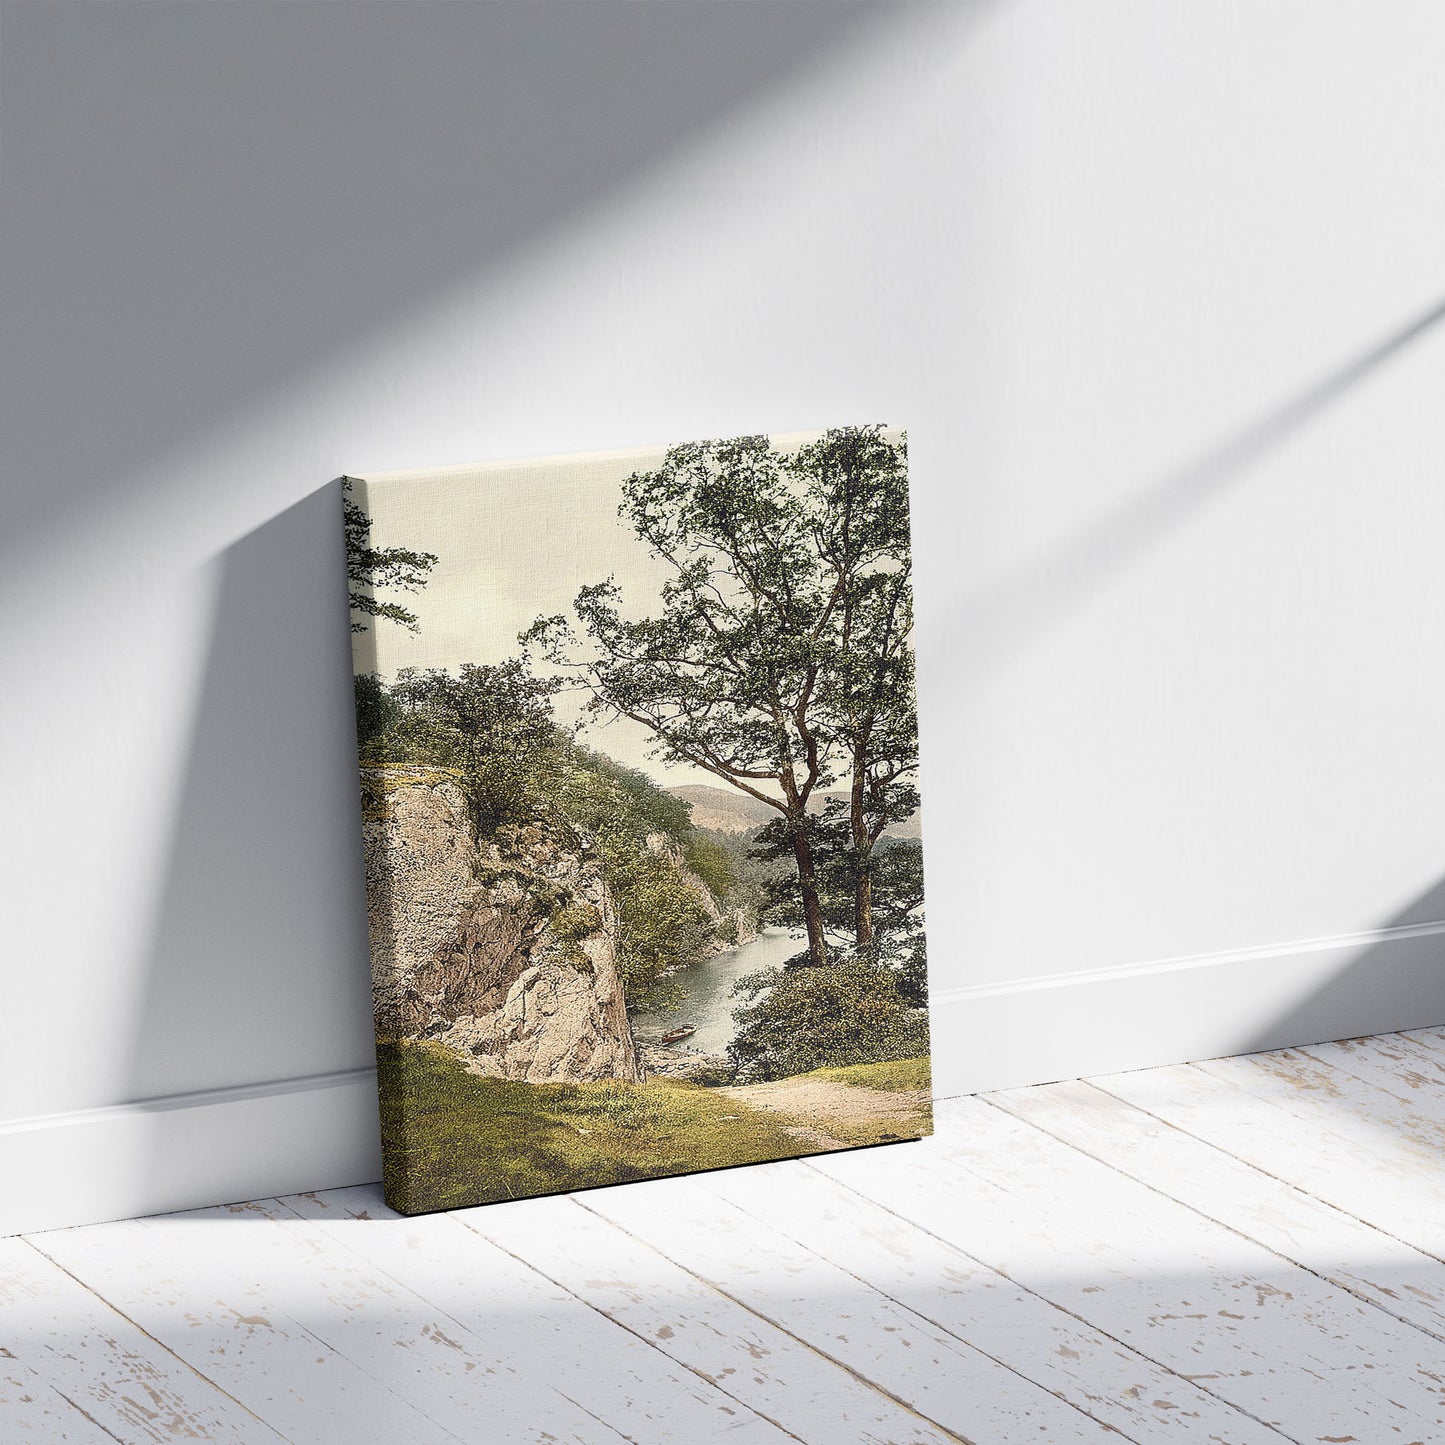 A picture of Ullswater, Stybarrow Crag, Lake District, England, a mockup of the print leaning against a wall